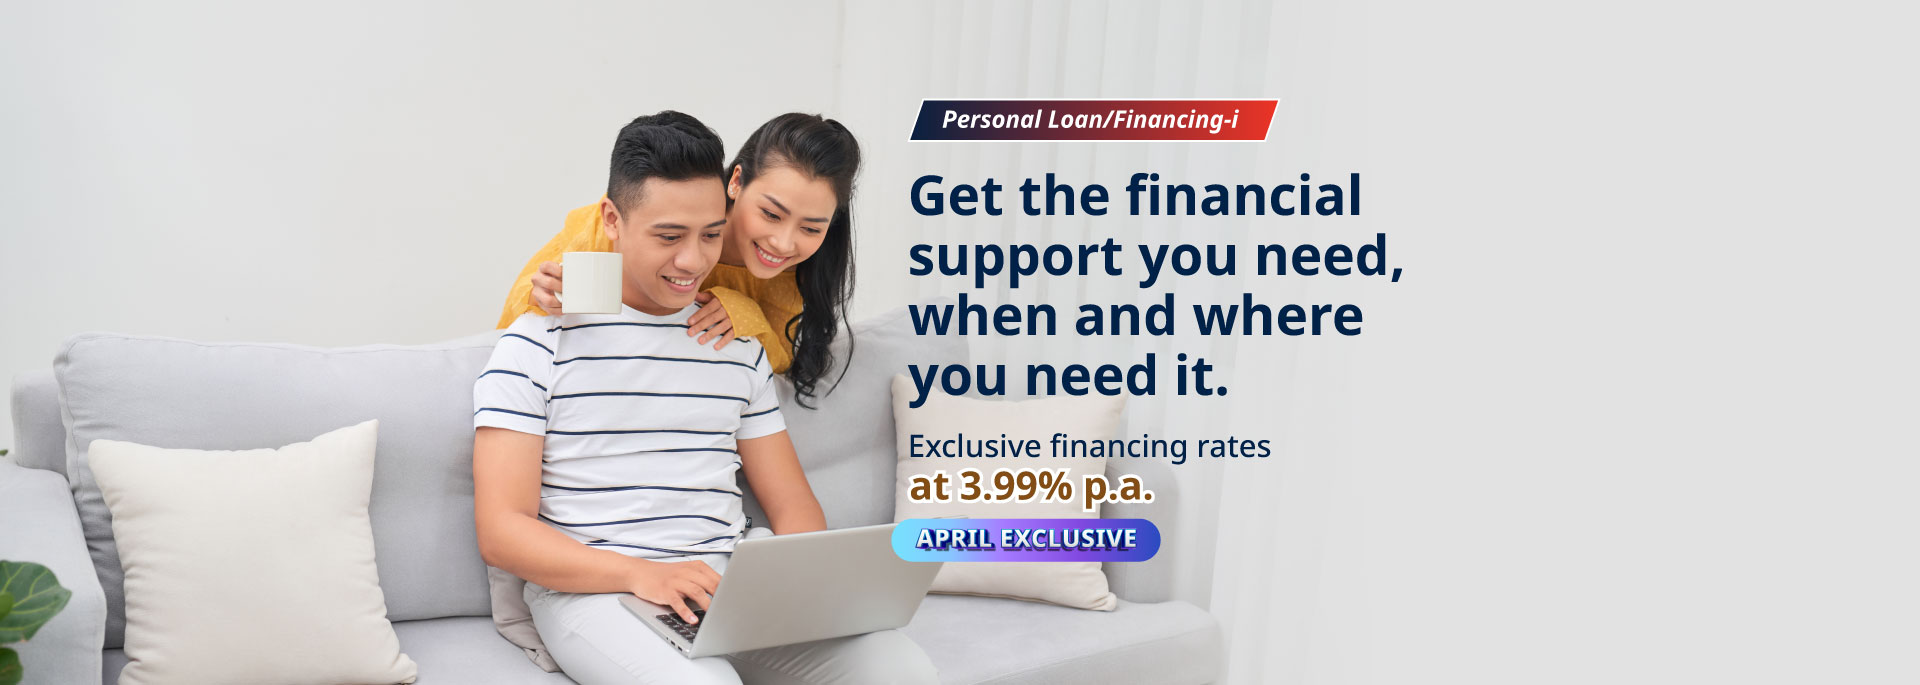 Personal Loan/Financing-i Connect Special Promo